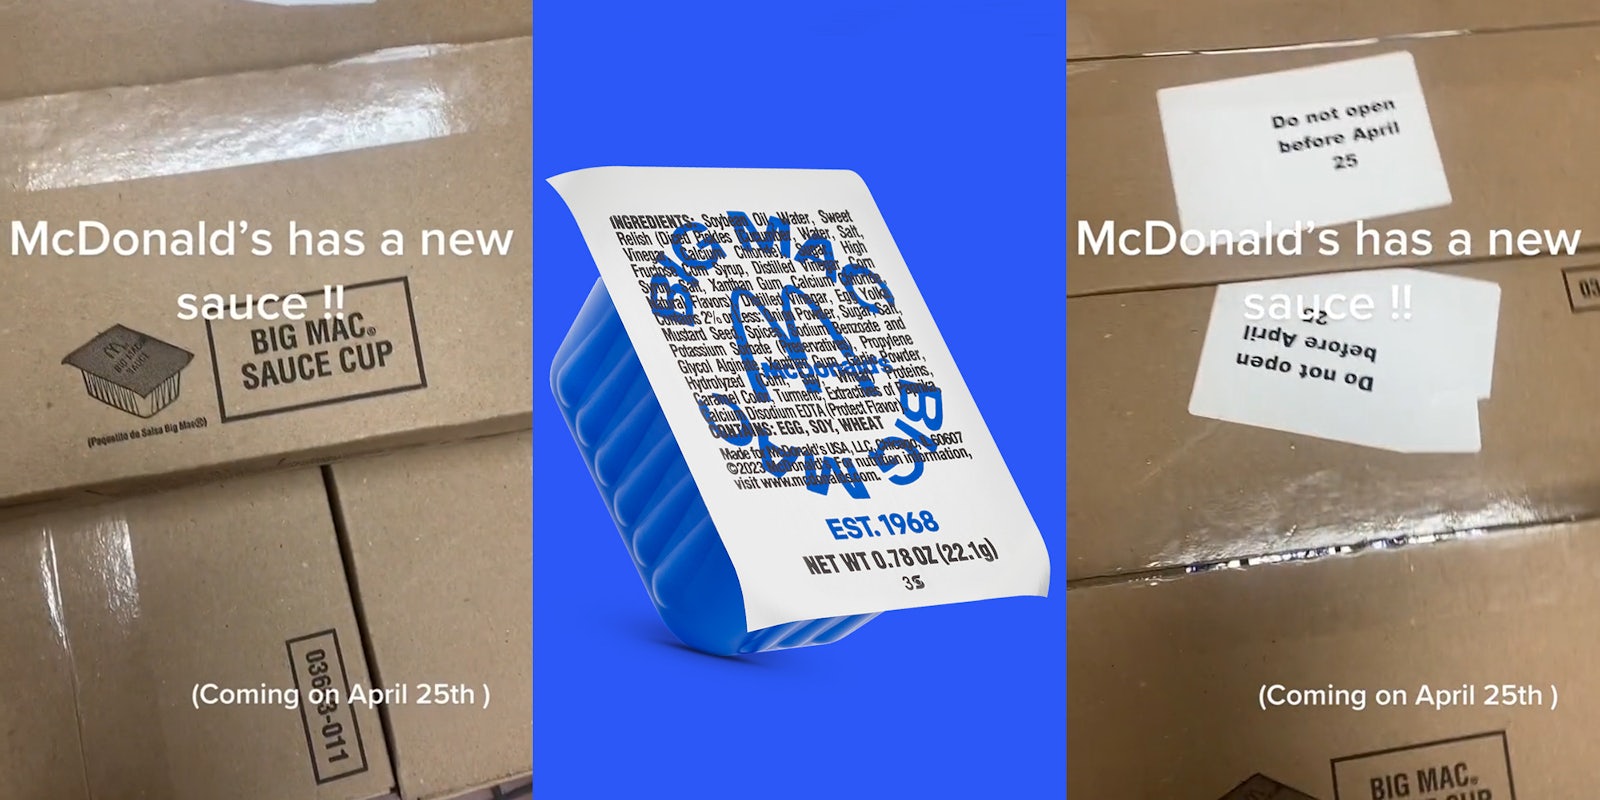 McDonald's box of Big Mac sauce with caption 'McDonald's has a new sauce!! (Coming on April 25th)' (l) Big Mac sauce in container in front of blue background (c) McDonald's box of Big Mac sauce with Do not open before April 25 stickers with caption 'McDonald's has a new sauce!! (Coming on April 25th)' (r)